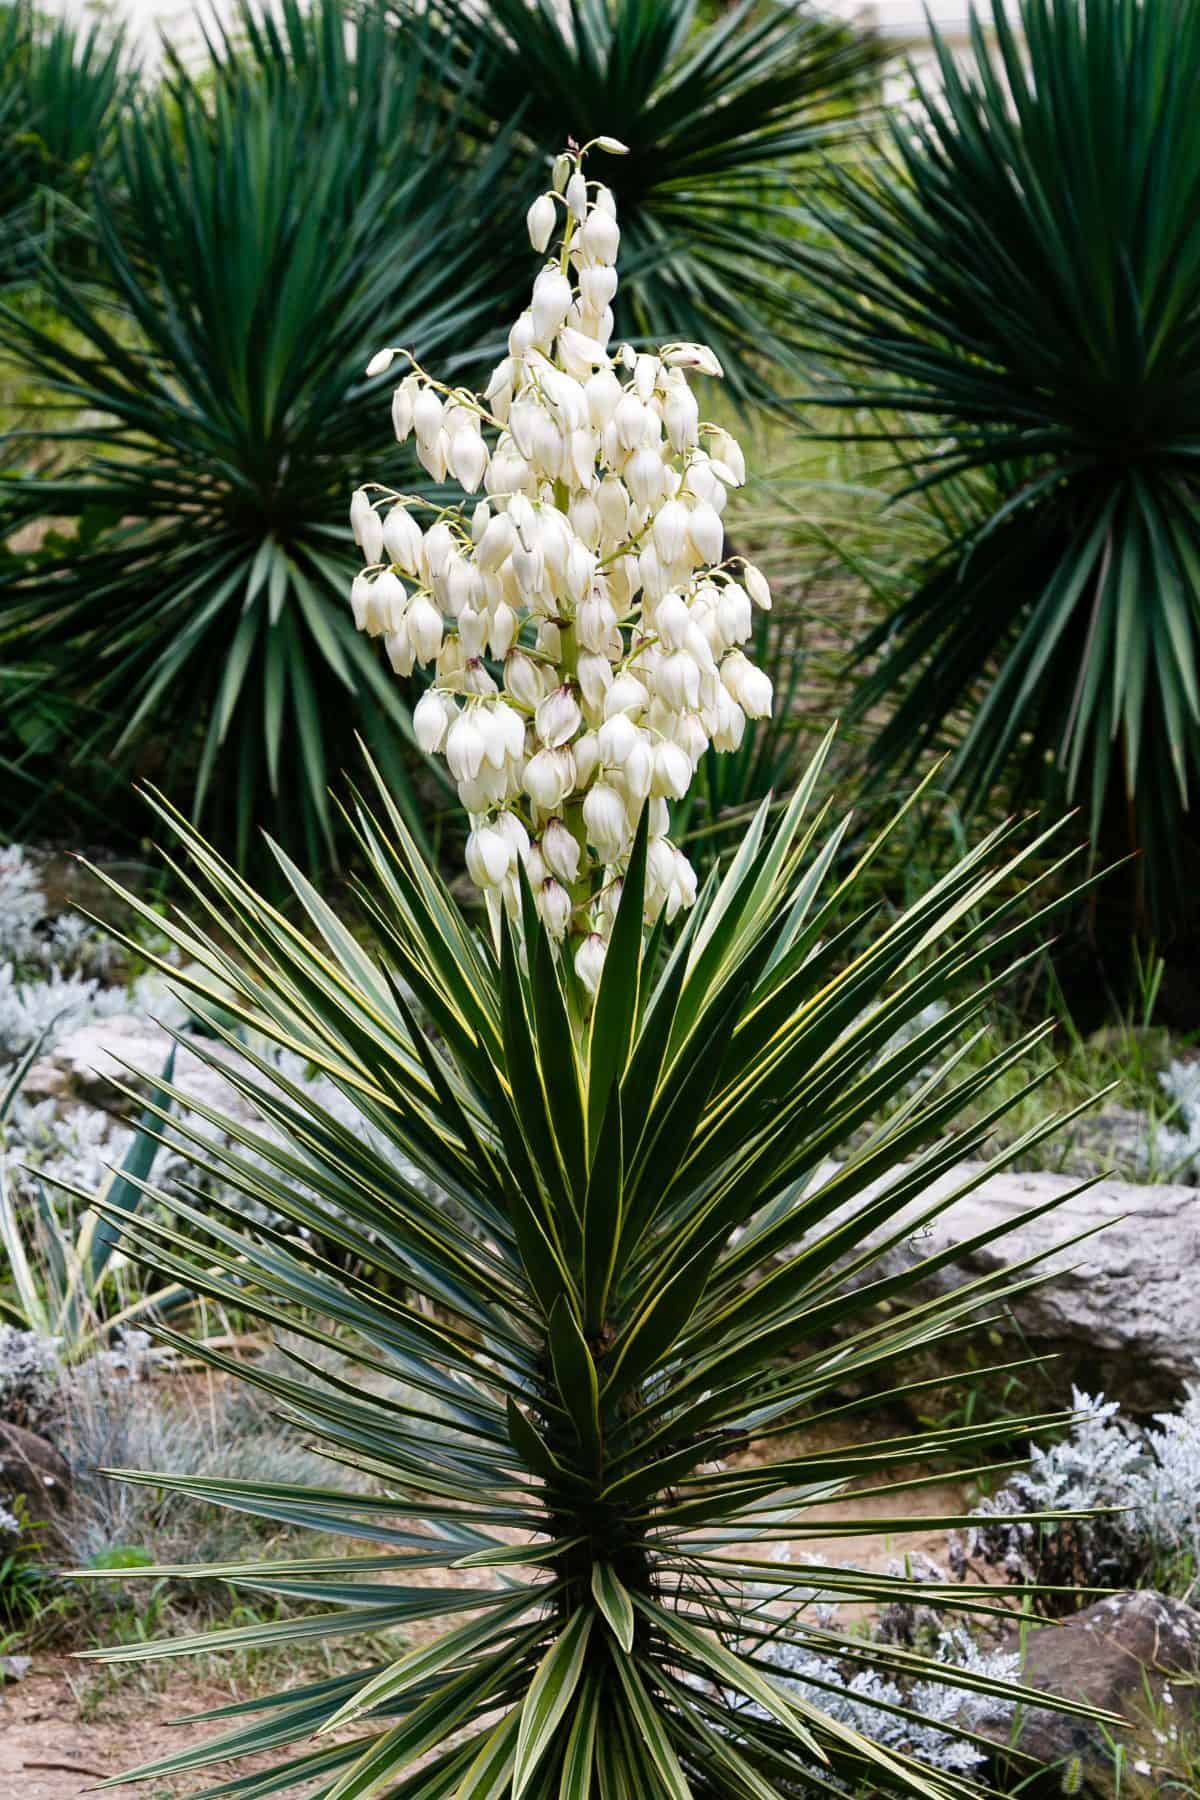 Yucca constricta in white bloom grows outdoor.